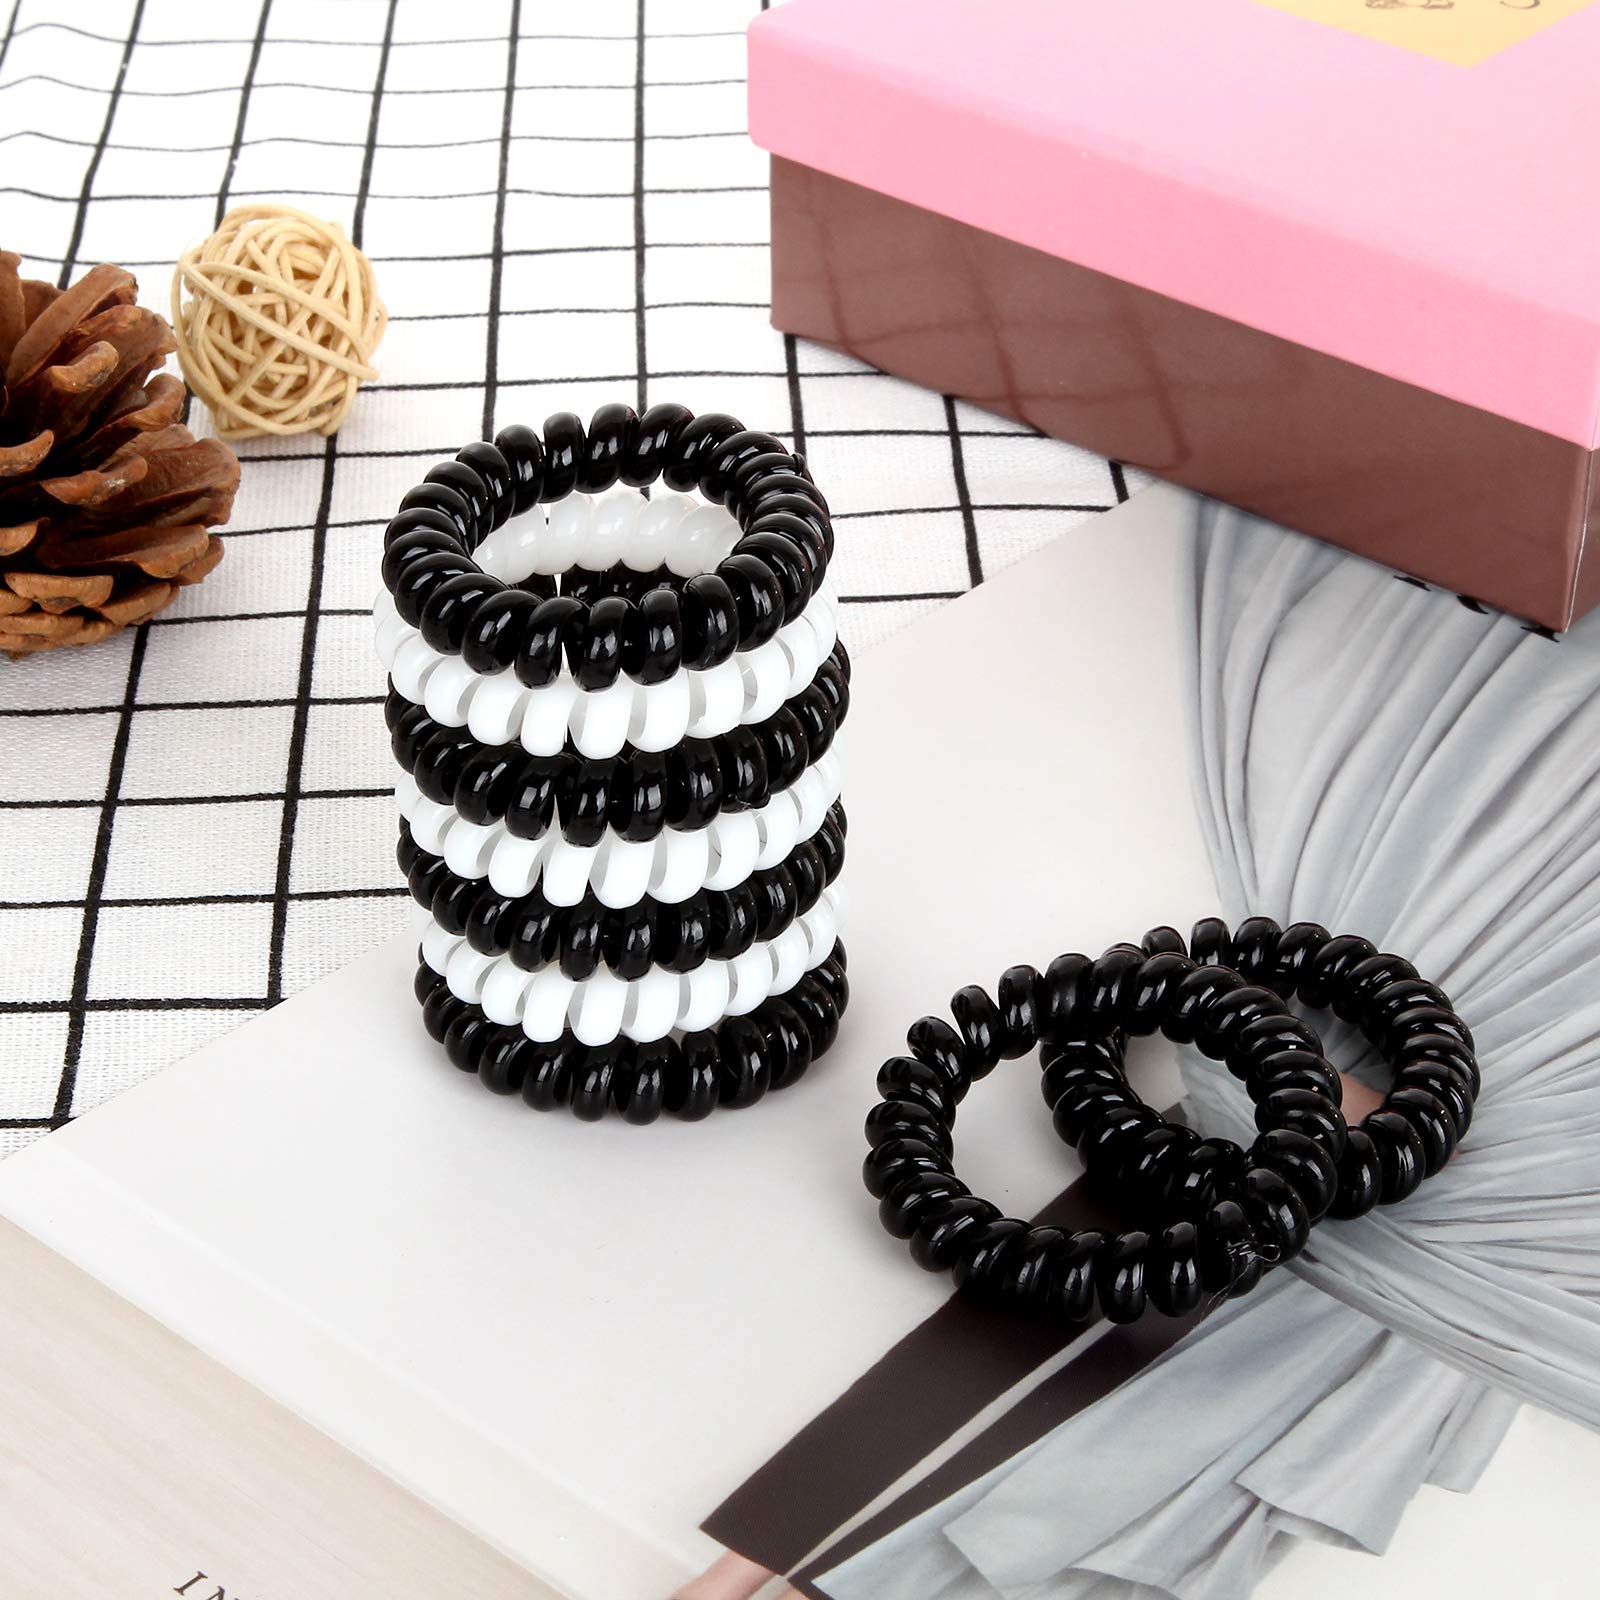 100PCS Wrist Keychain Bracelet Spiral Wrist Coil Key Chain Bulk Plastic Stretchable Spiral Keychain Bracelet Black & White Spring Wrist Keychain Use for Office Workshop Shopping Mall Sauna and More